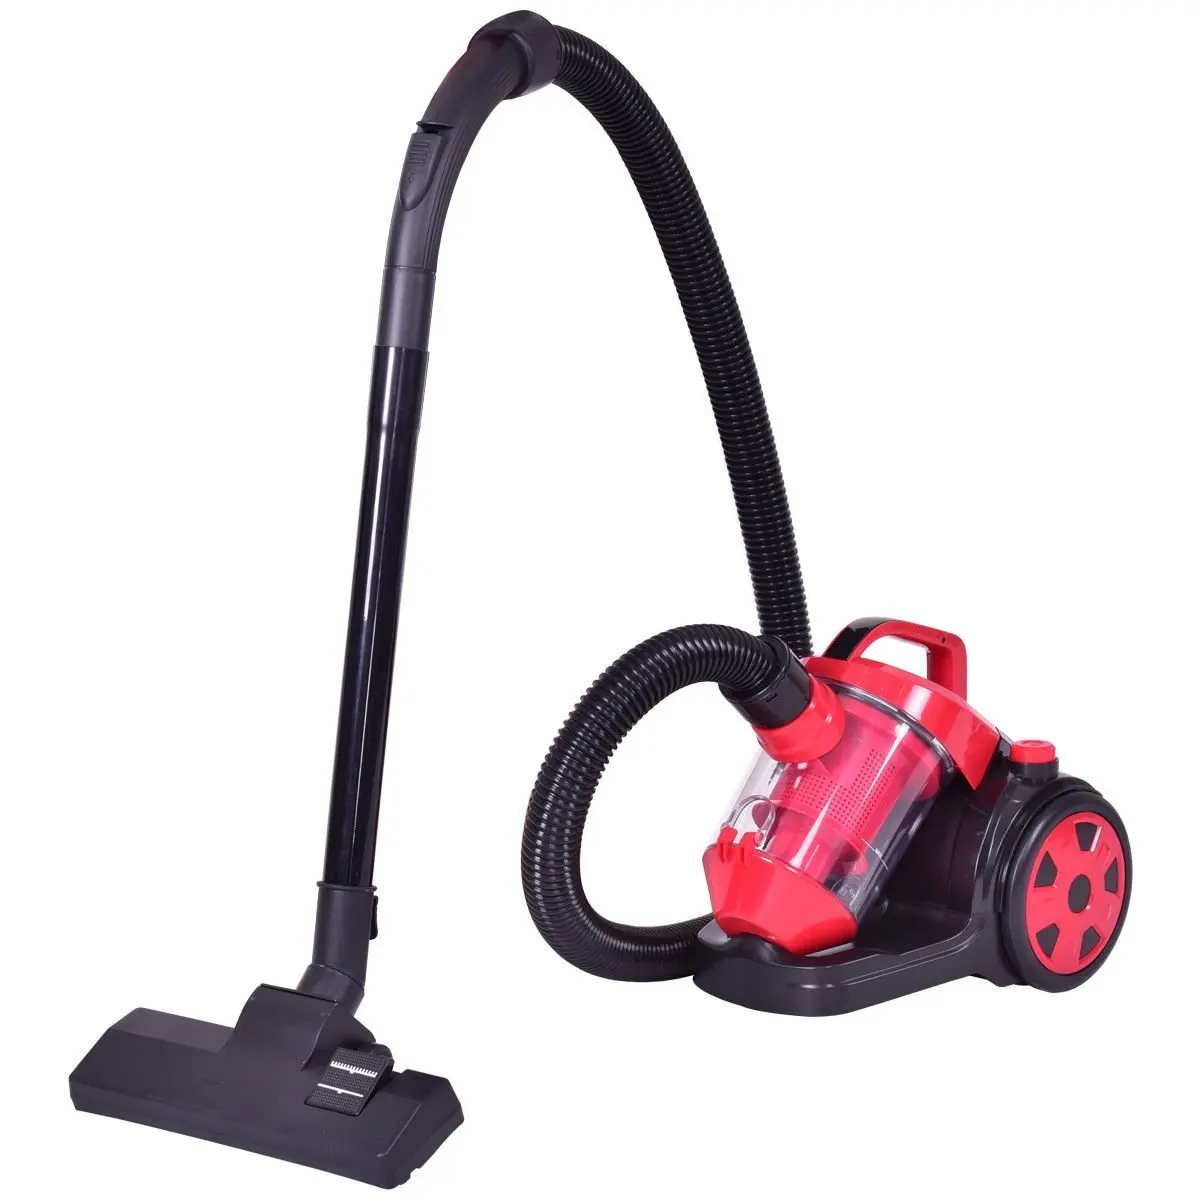 Canister vacuum cleaners. Пылесос Sakura HEPA Filtration System. Vacuum Cleaner with Bag or Canister. Bagless, Portable.